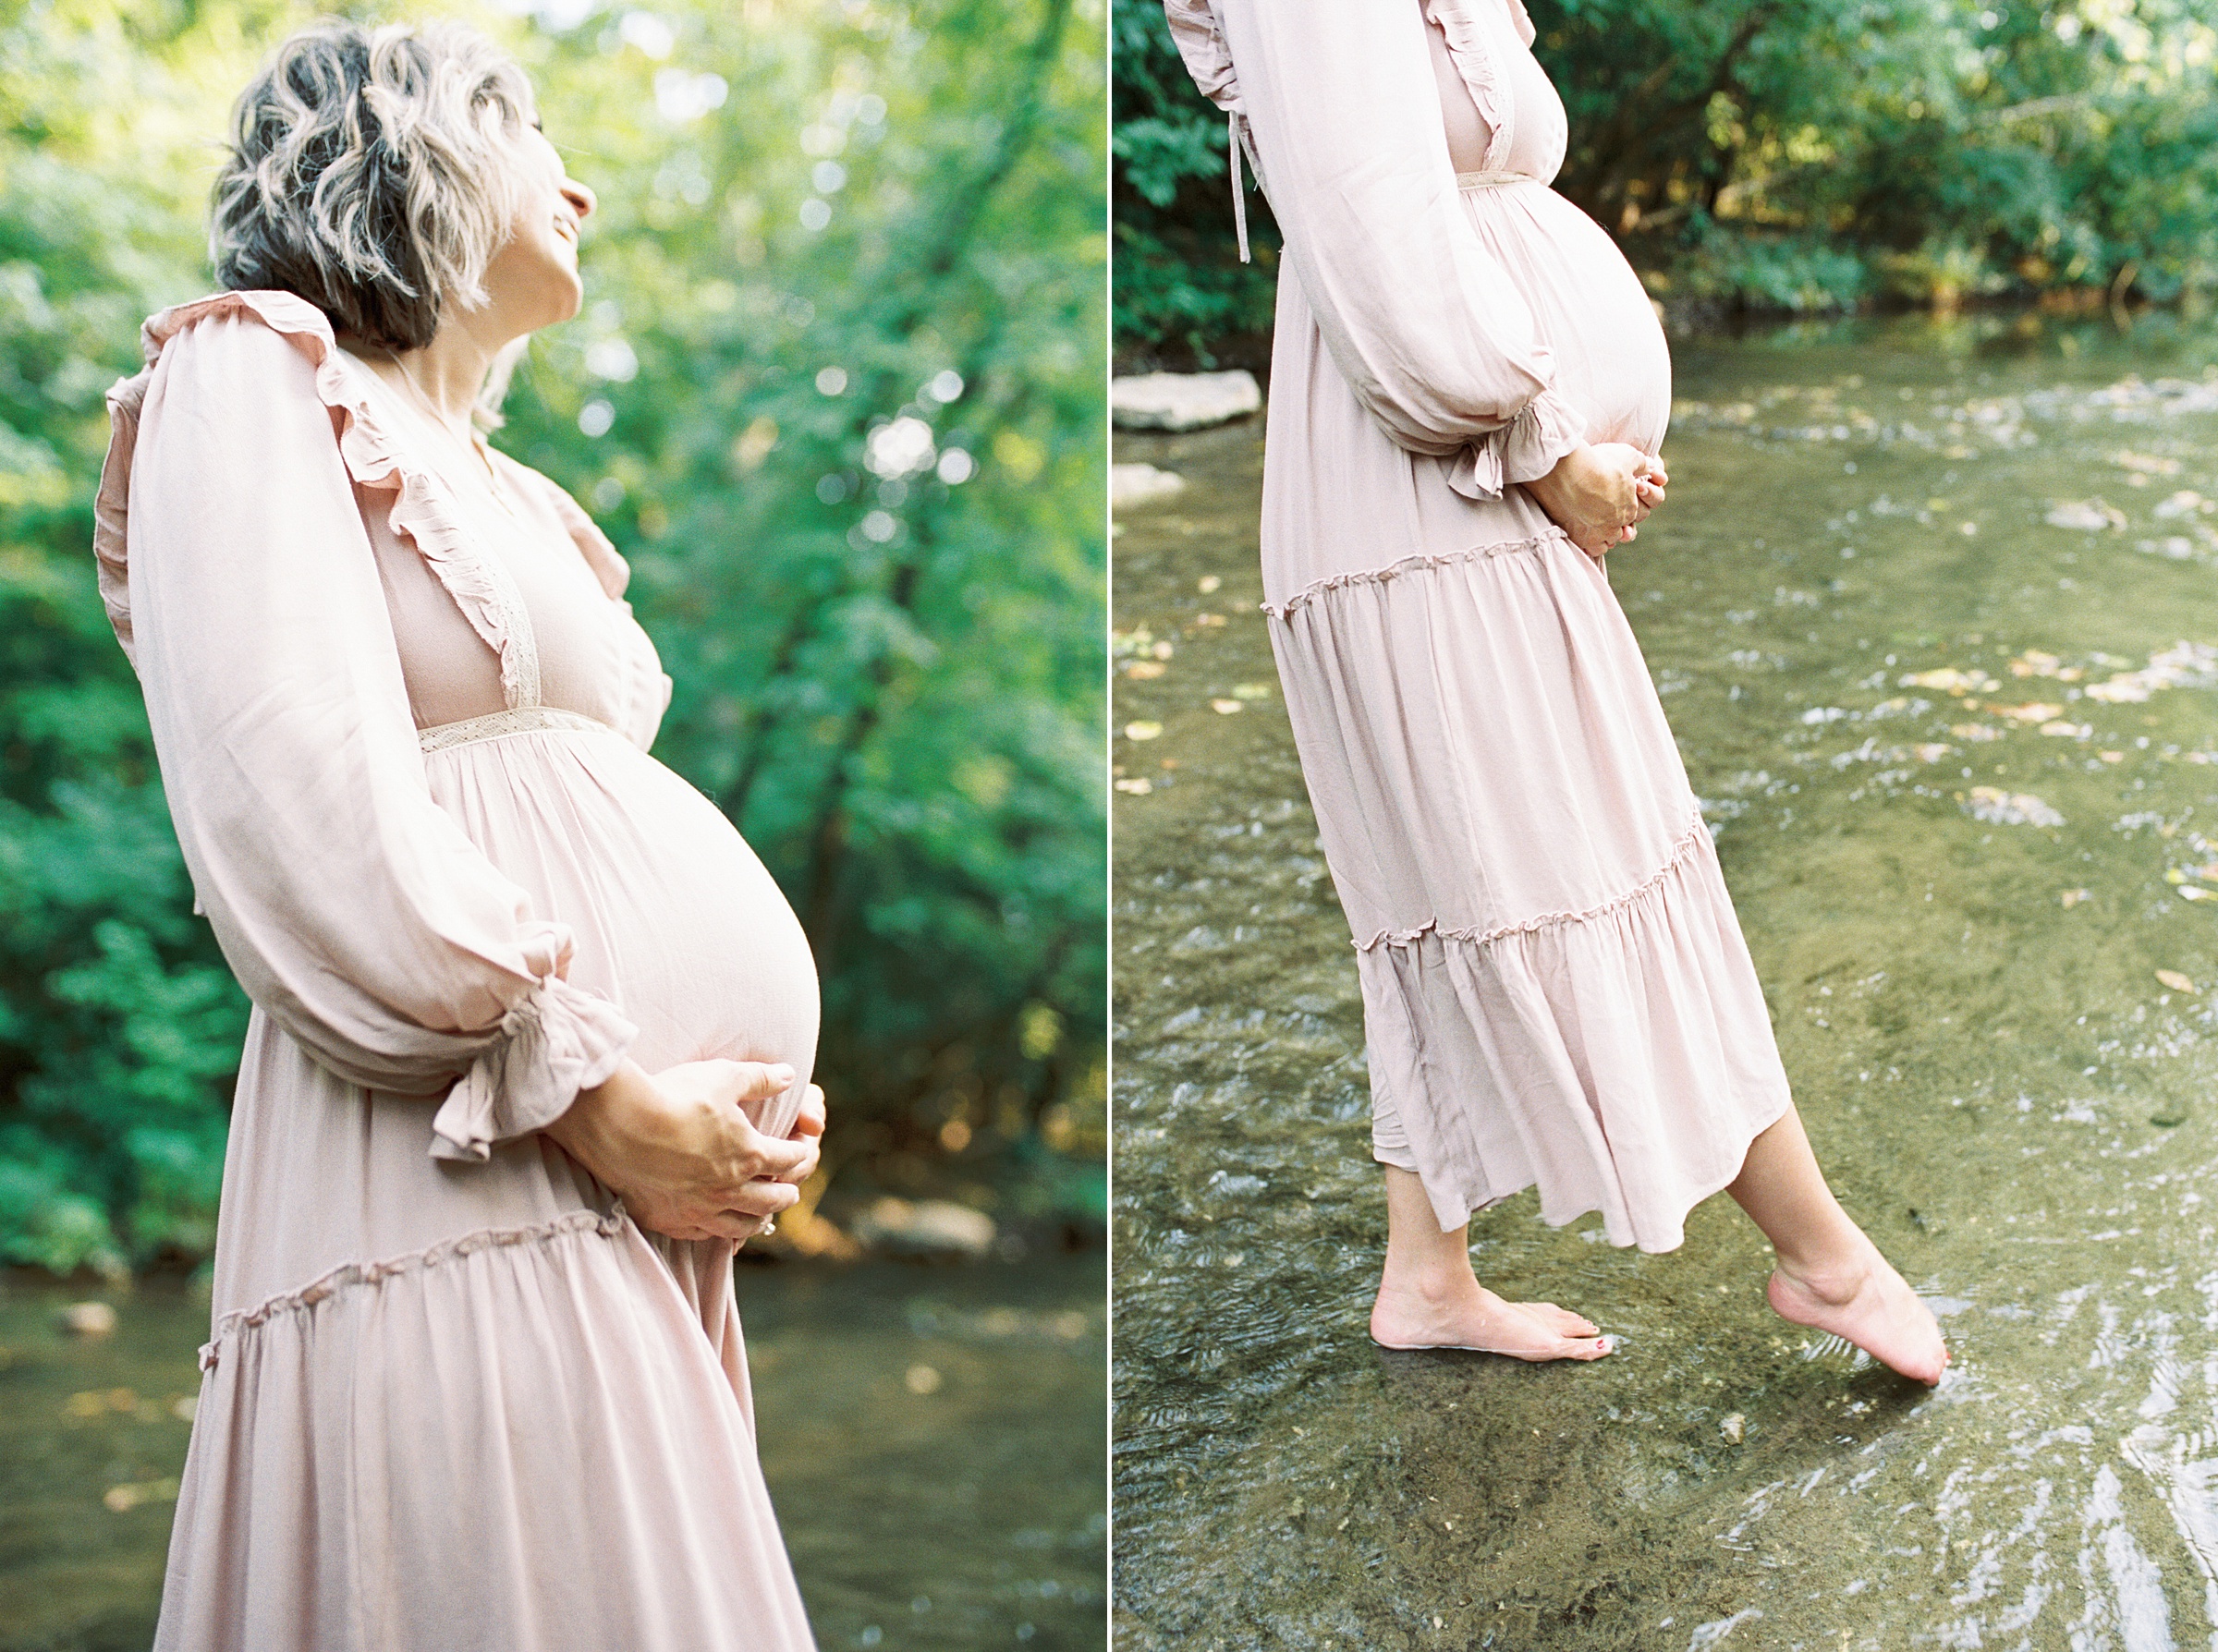 Maternity portraits at Ellington Agricultural center in TN by Grace Paul Photography